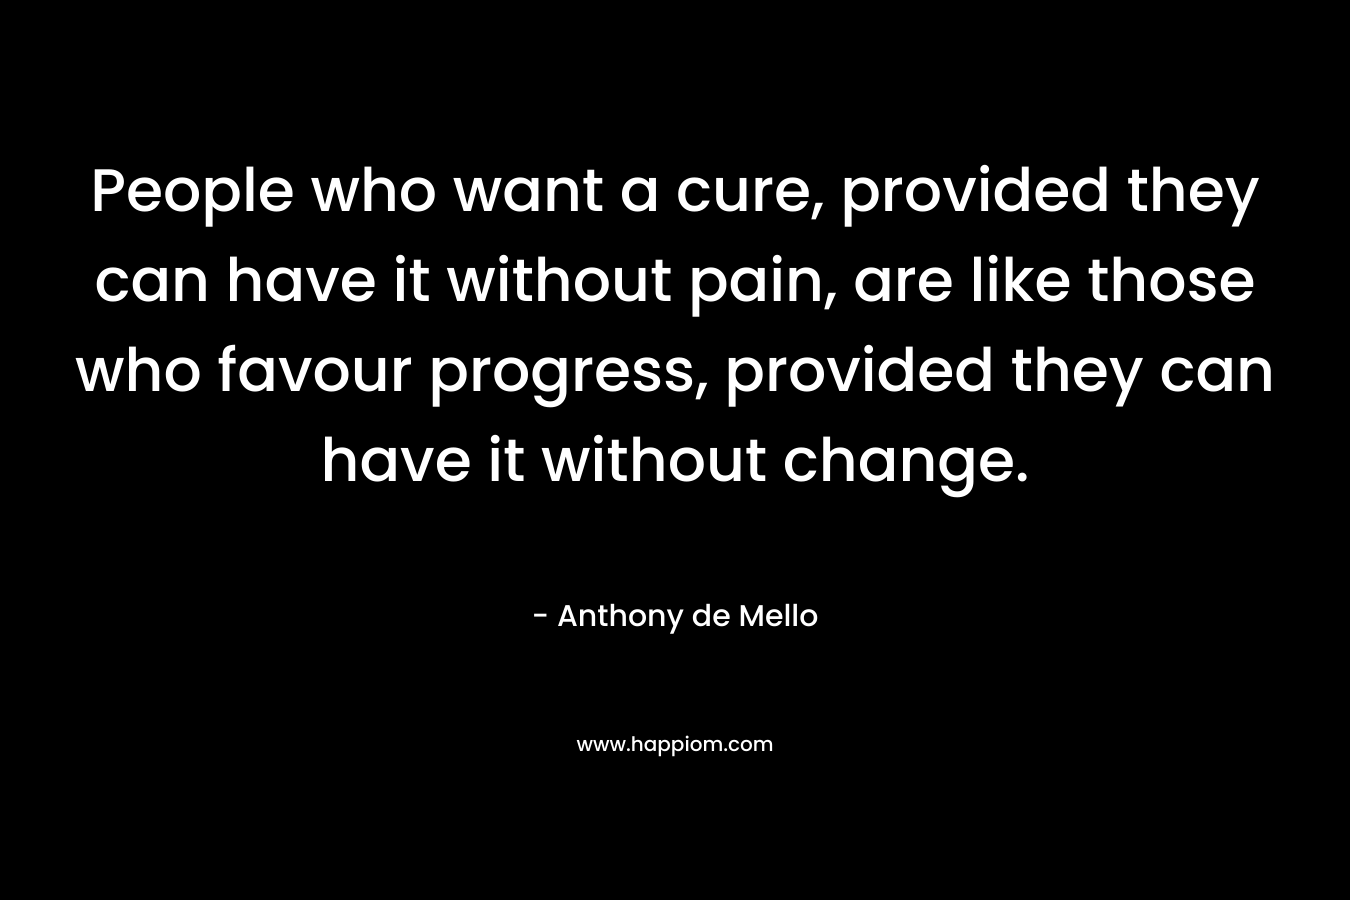 People who want a cure, provided they can have it without pain, are like those who favour progress, provided they can have it without change.